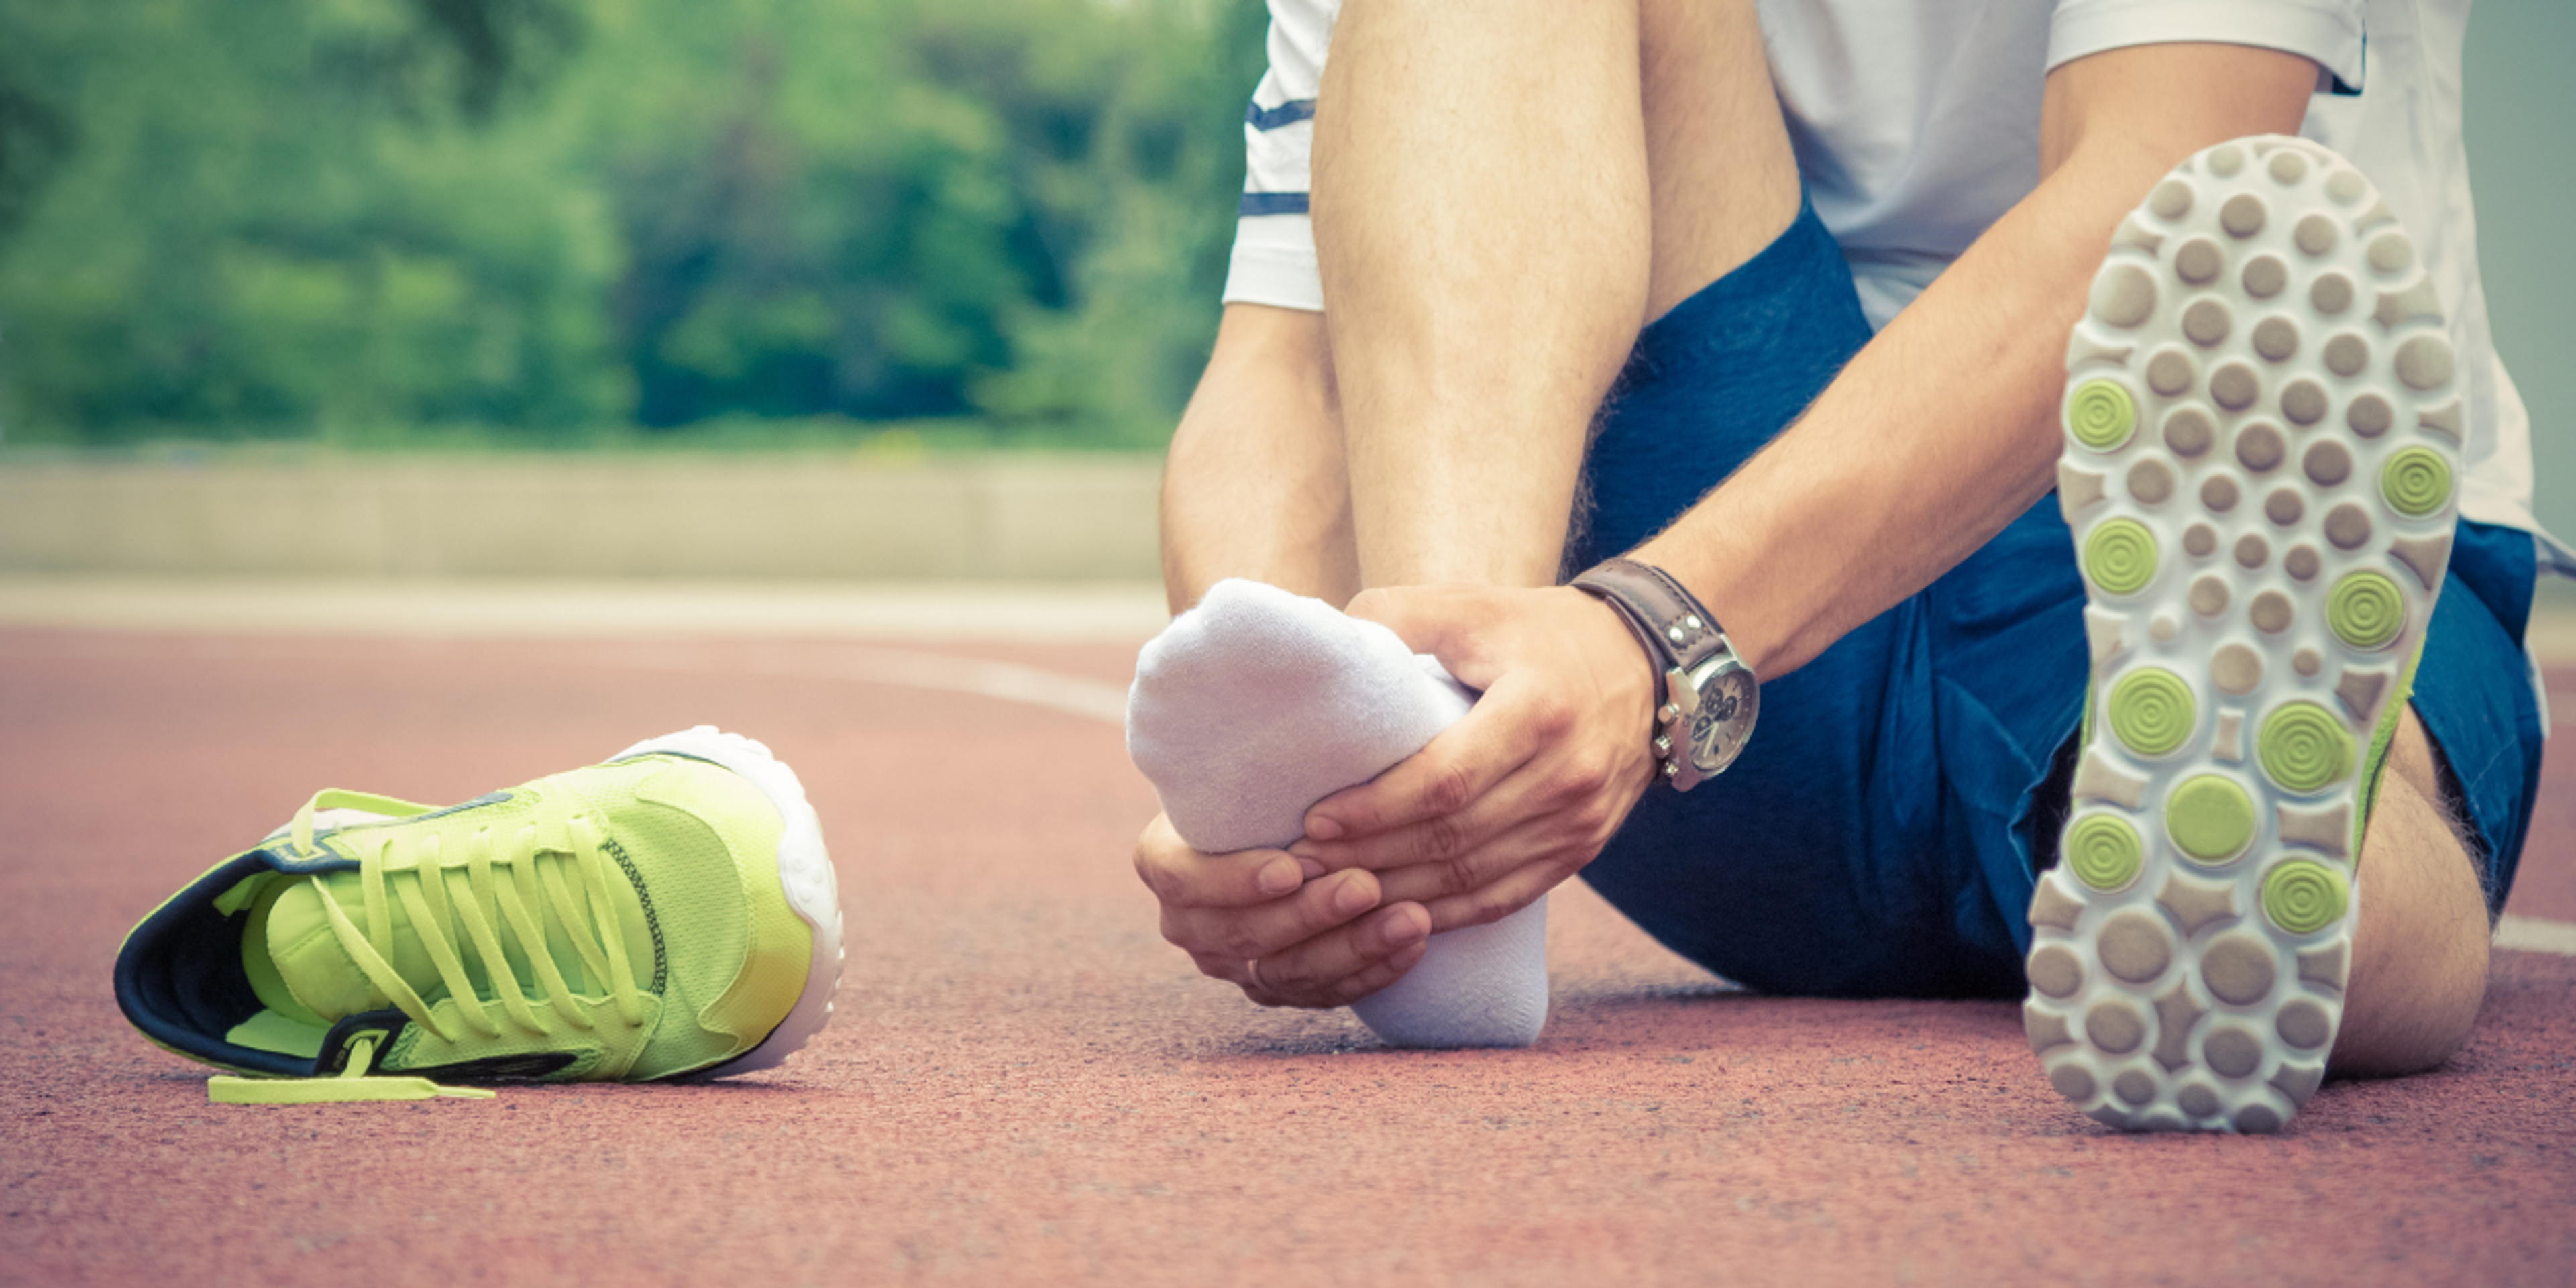 Runner holding his foot due to plantar fasciitis pain